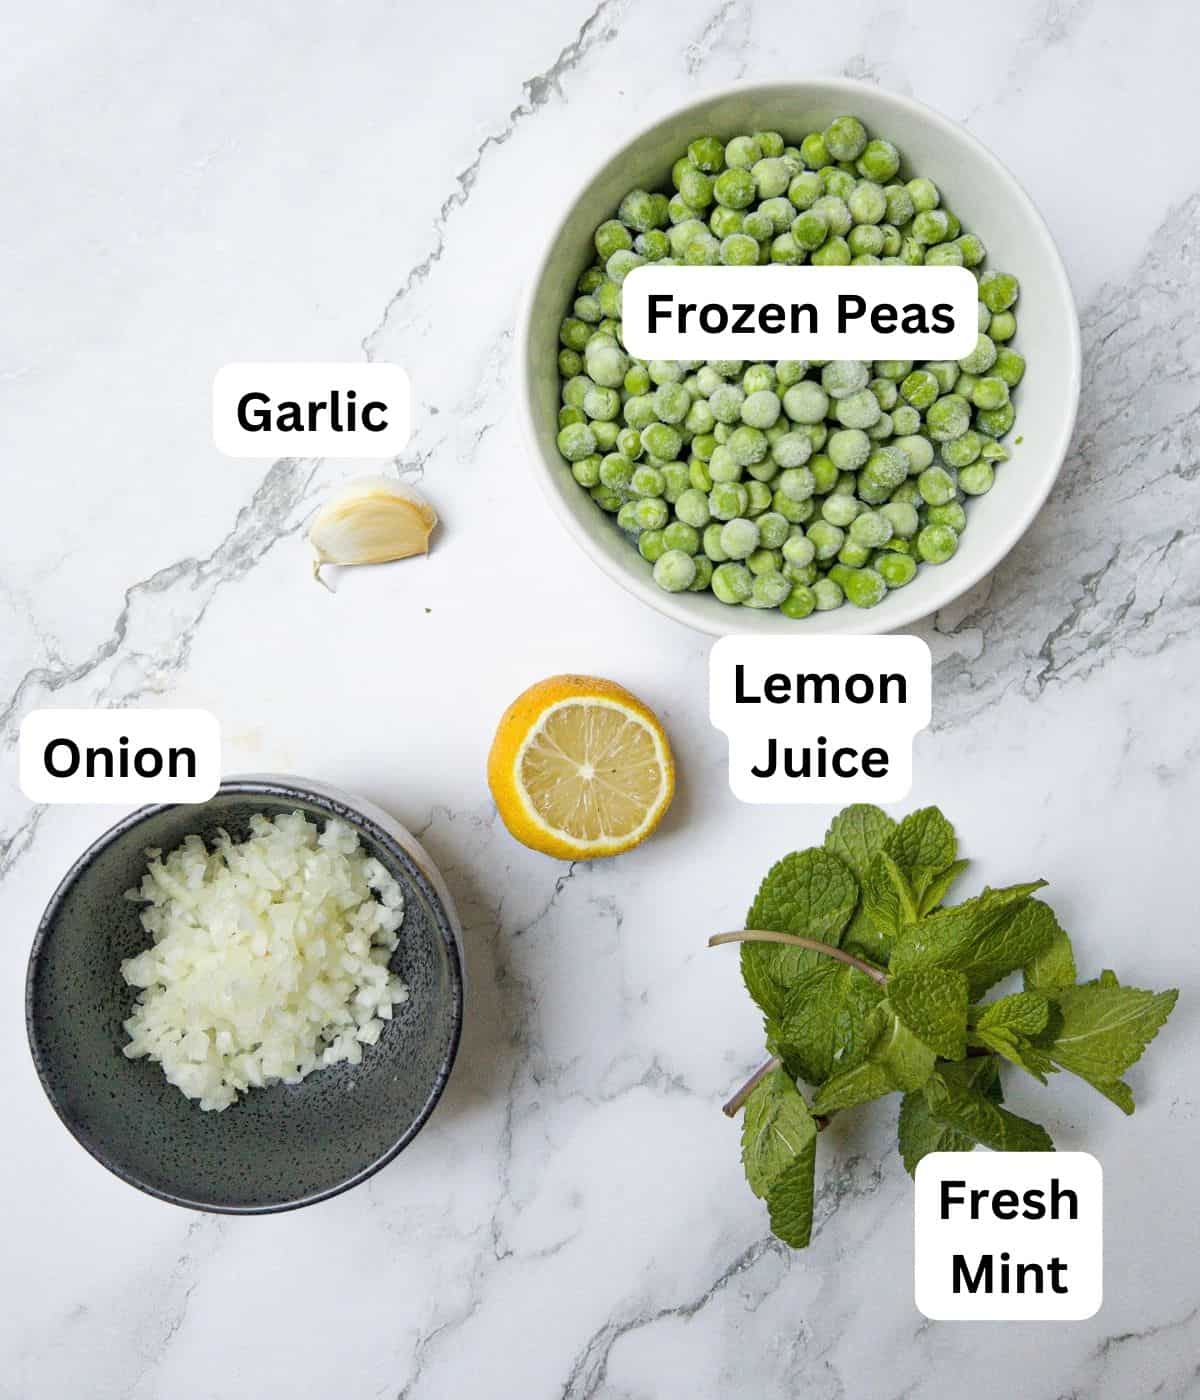 Ingredients laid out for minted mushy peas.